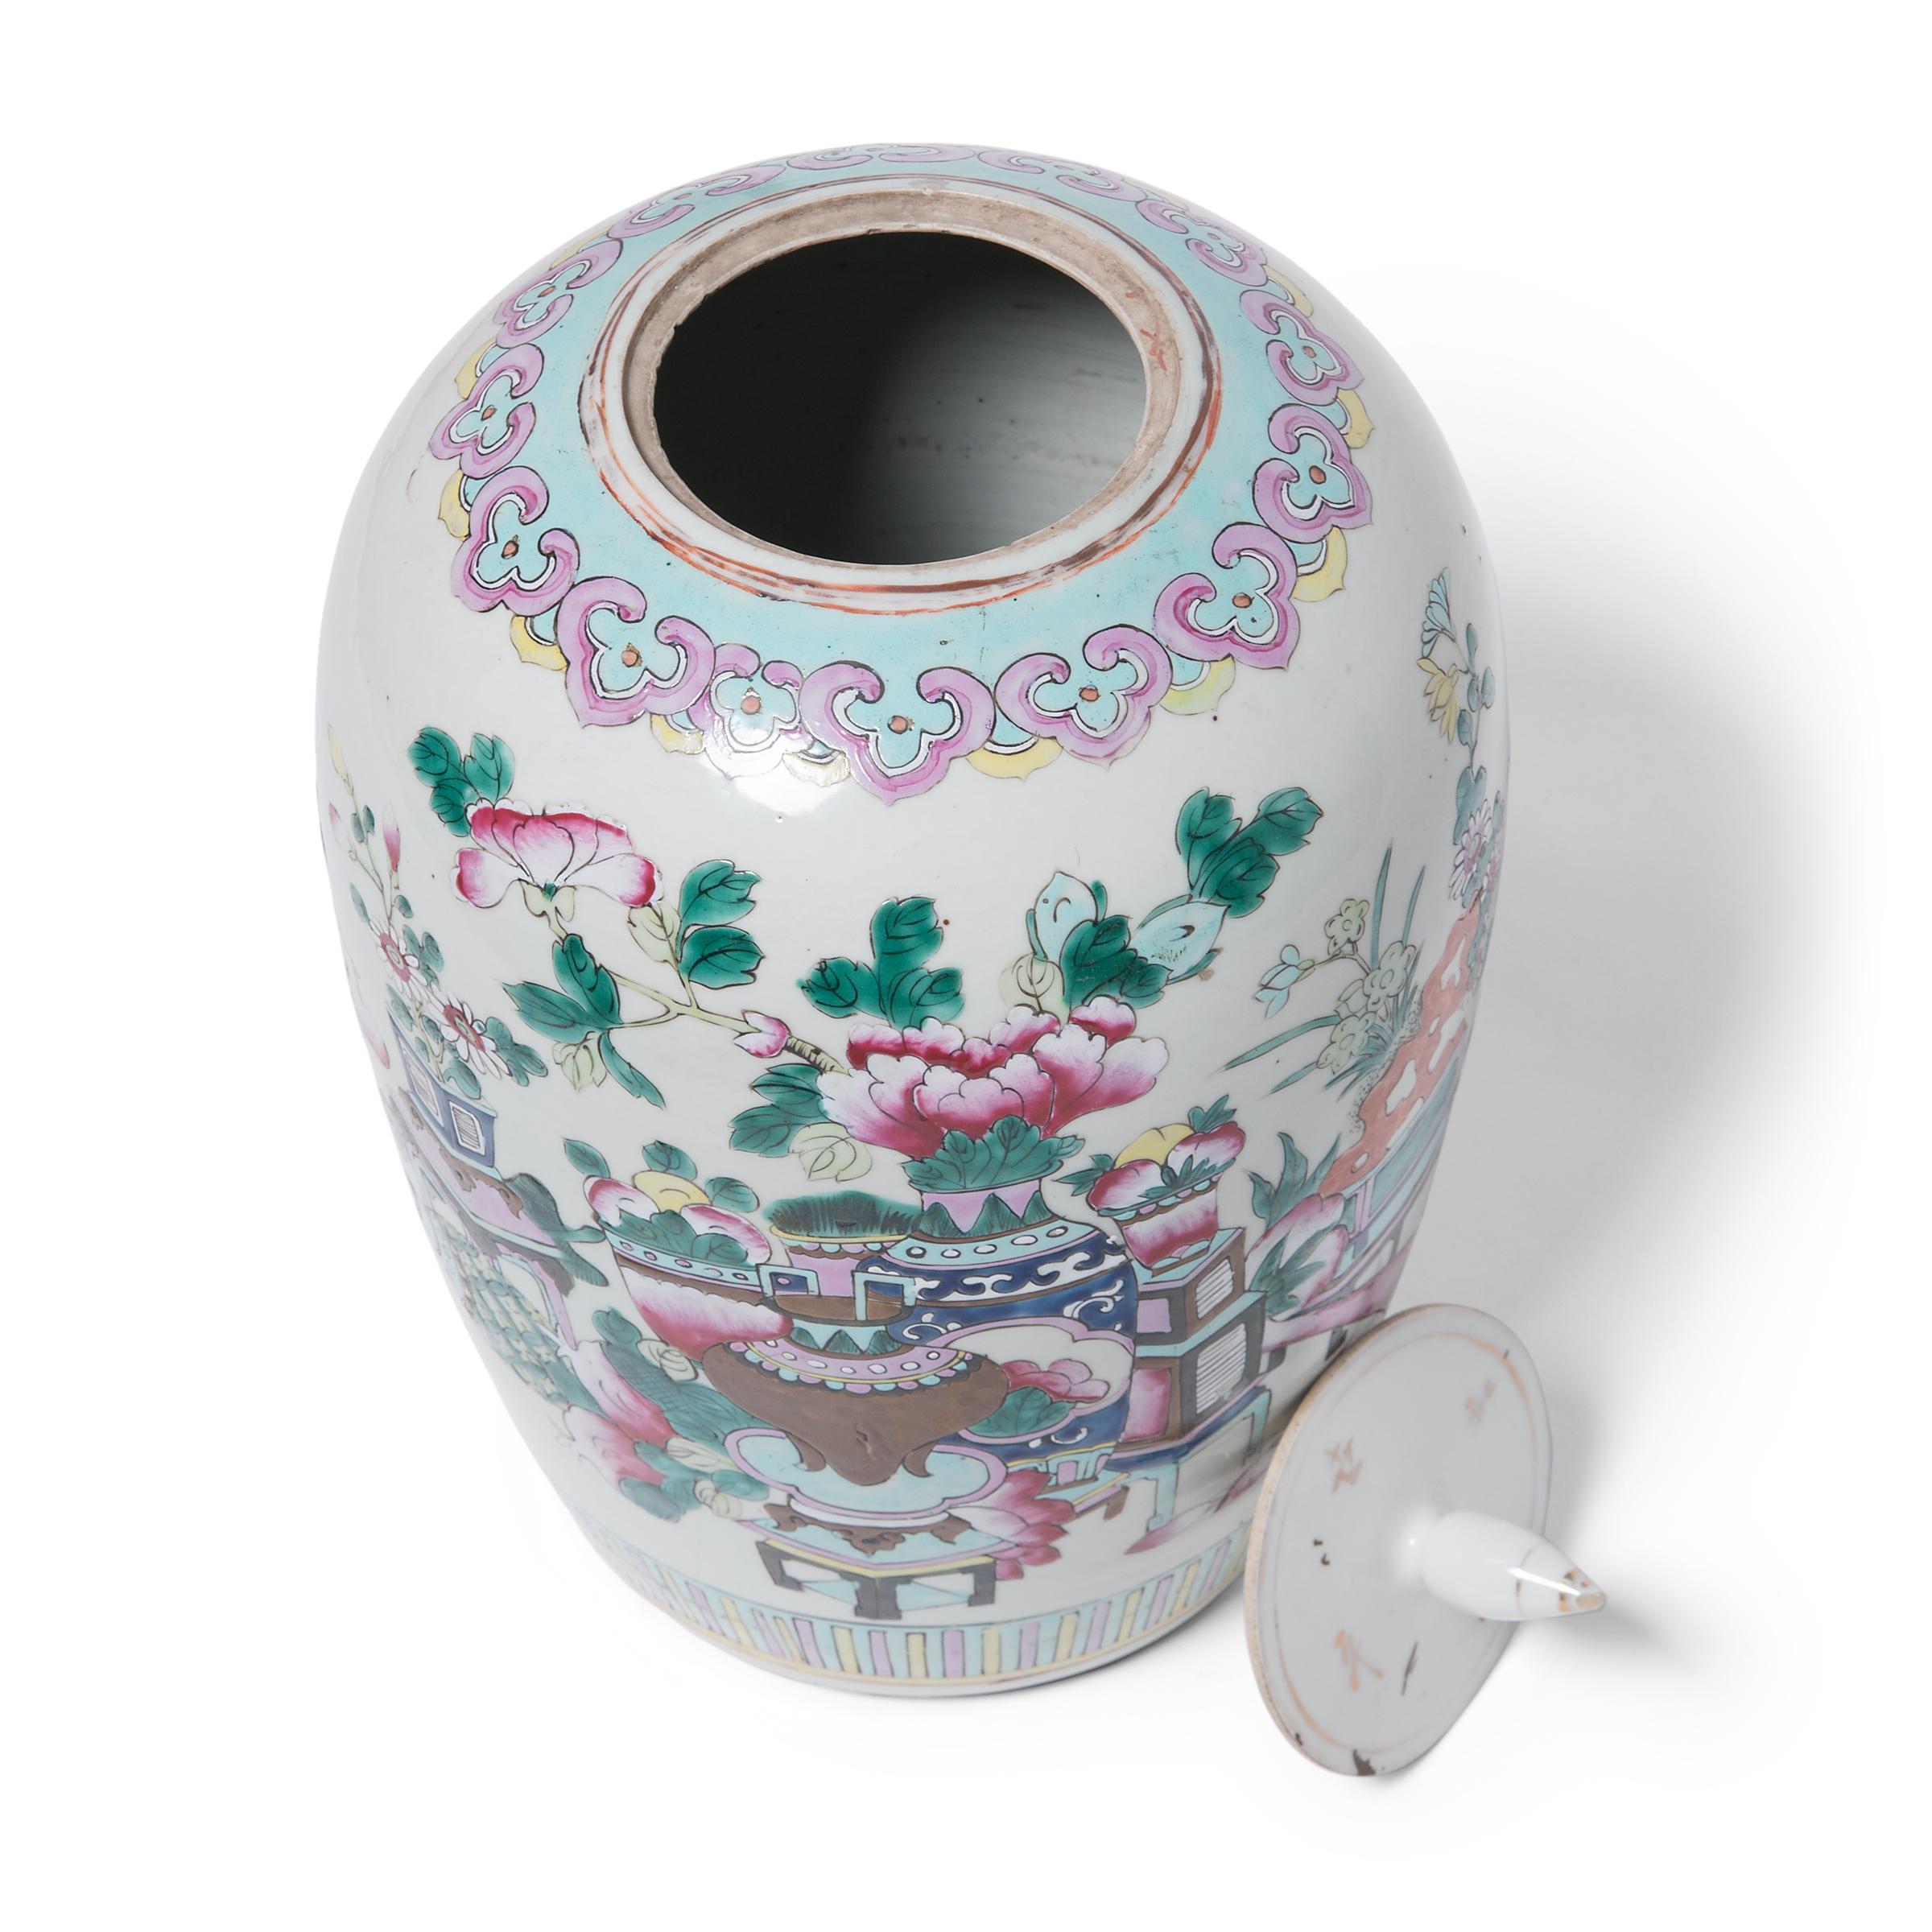 Enamel Chinese Famille Rose Ginger Jar with Fruits and Flowers, circa 1900 For Sale